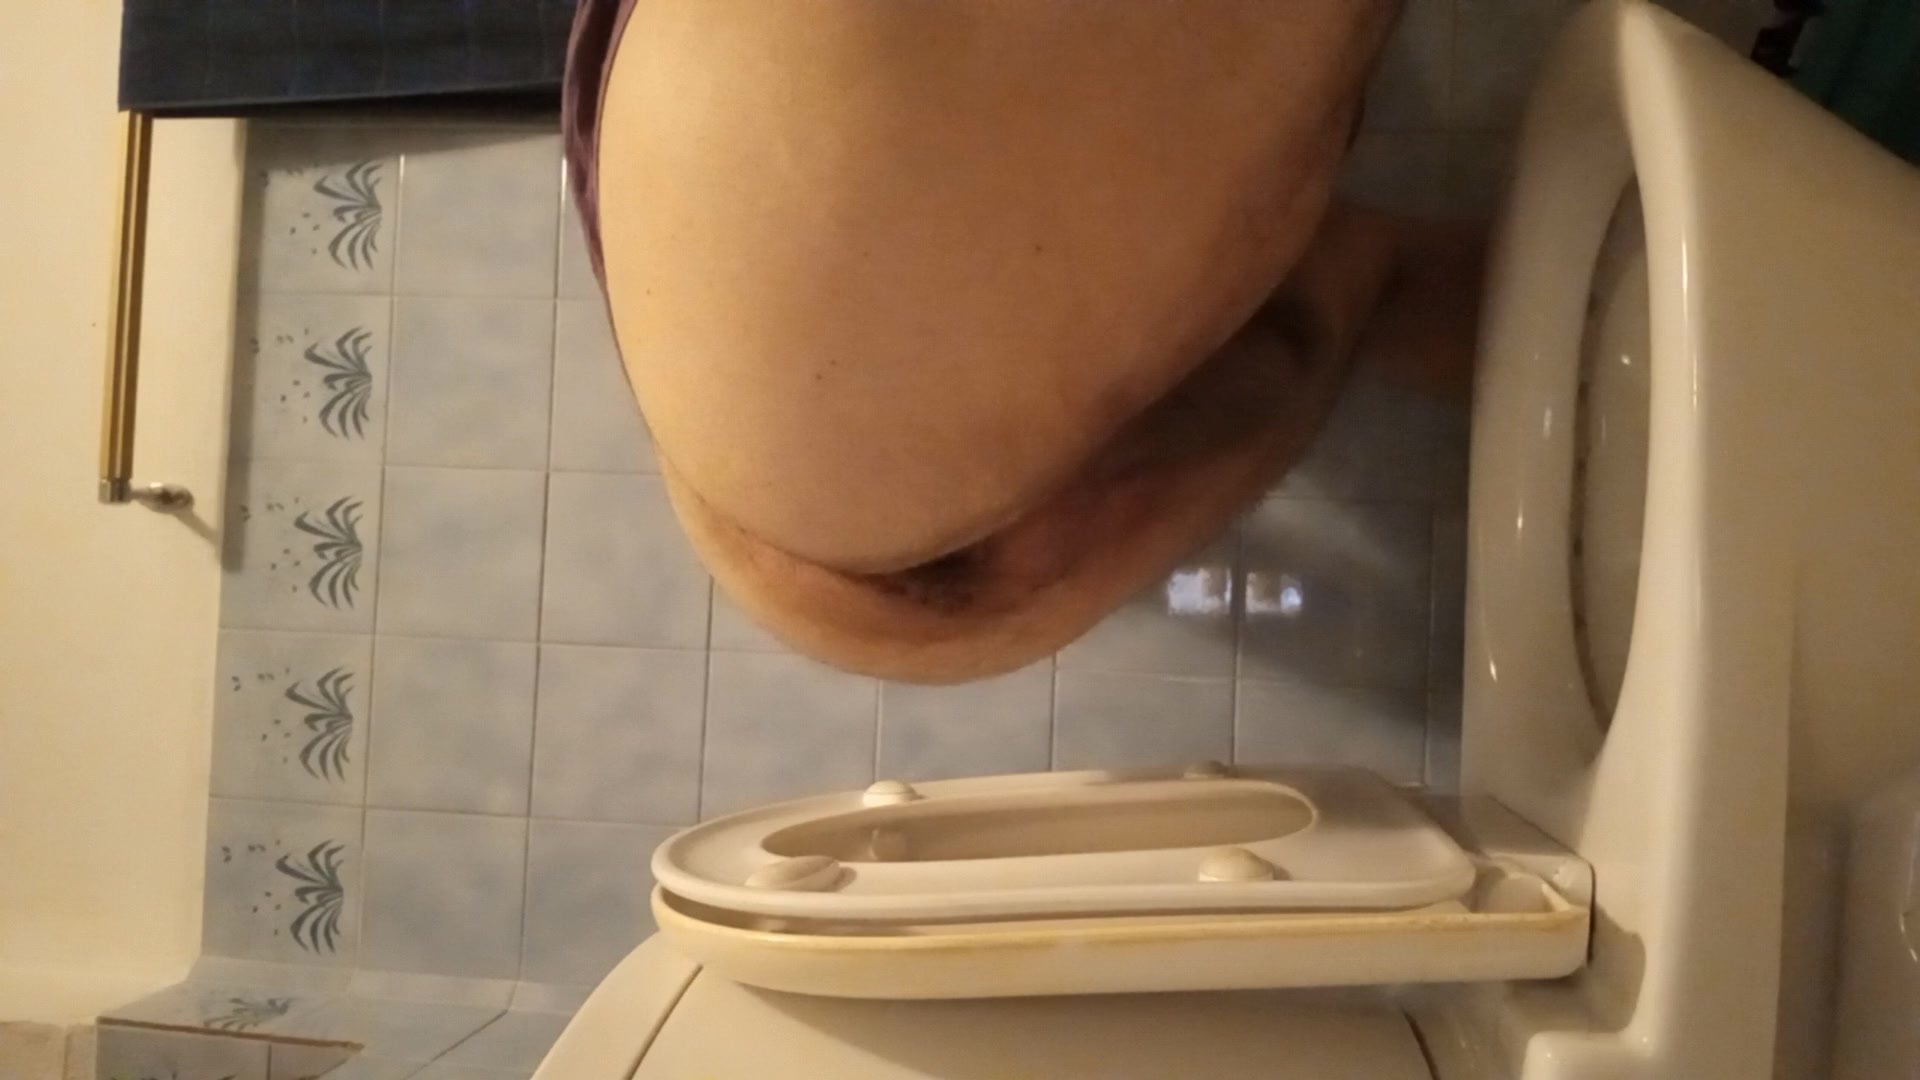 Huge dump and piss